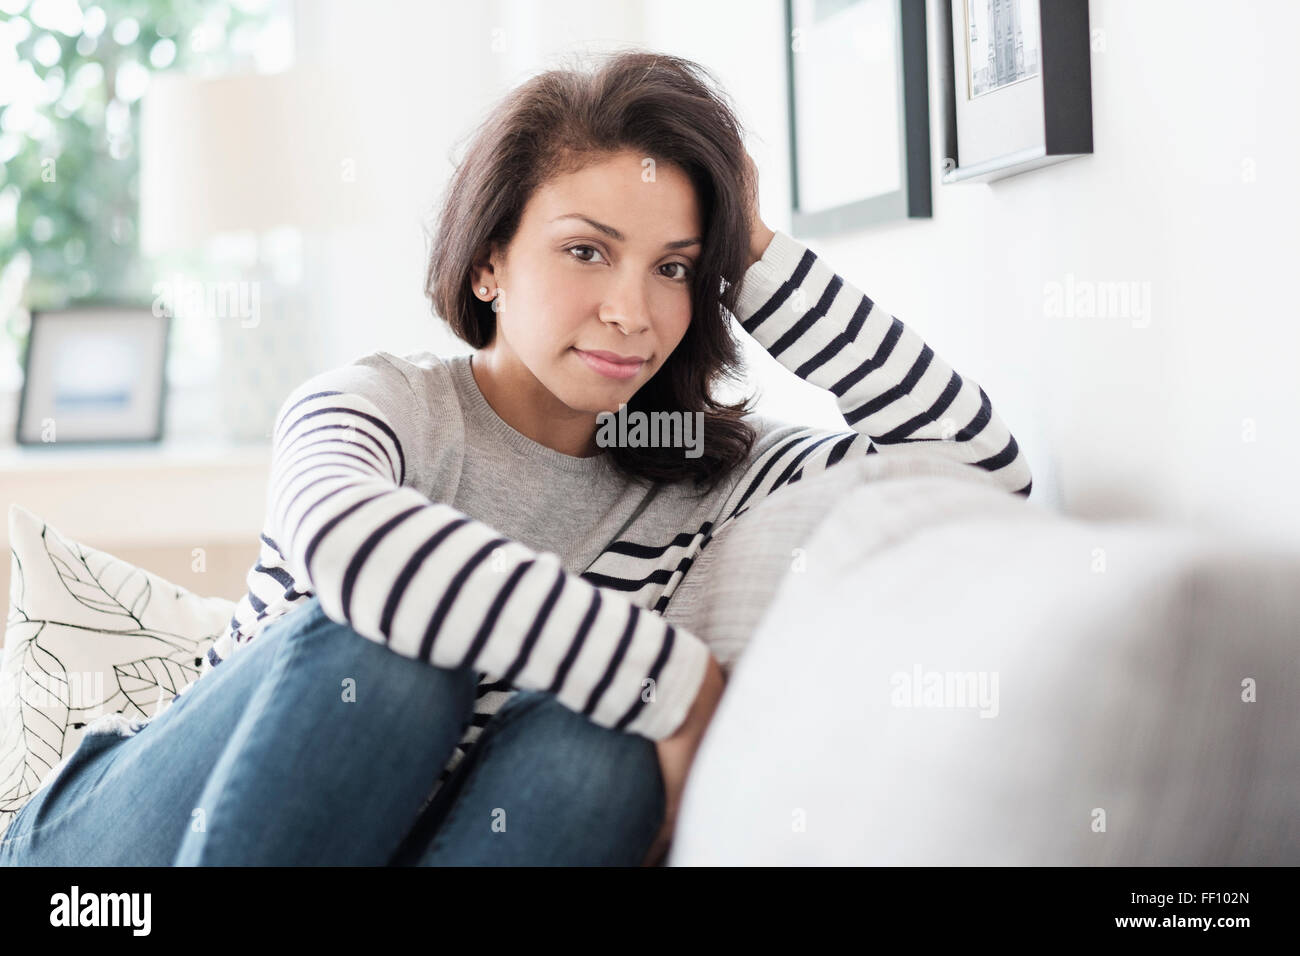 Mixed Race woman sitting on sofa Banque D'Images